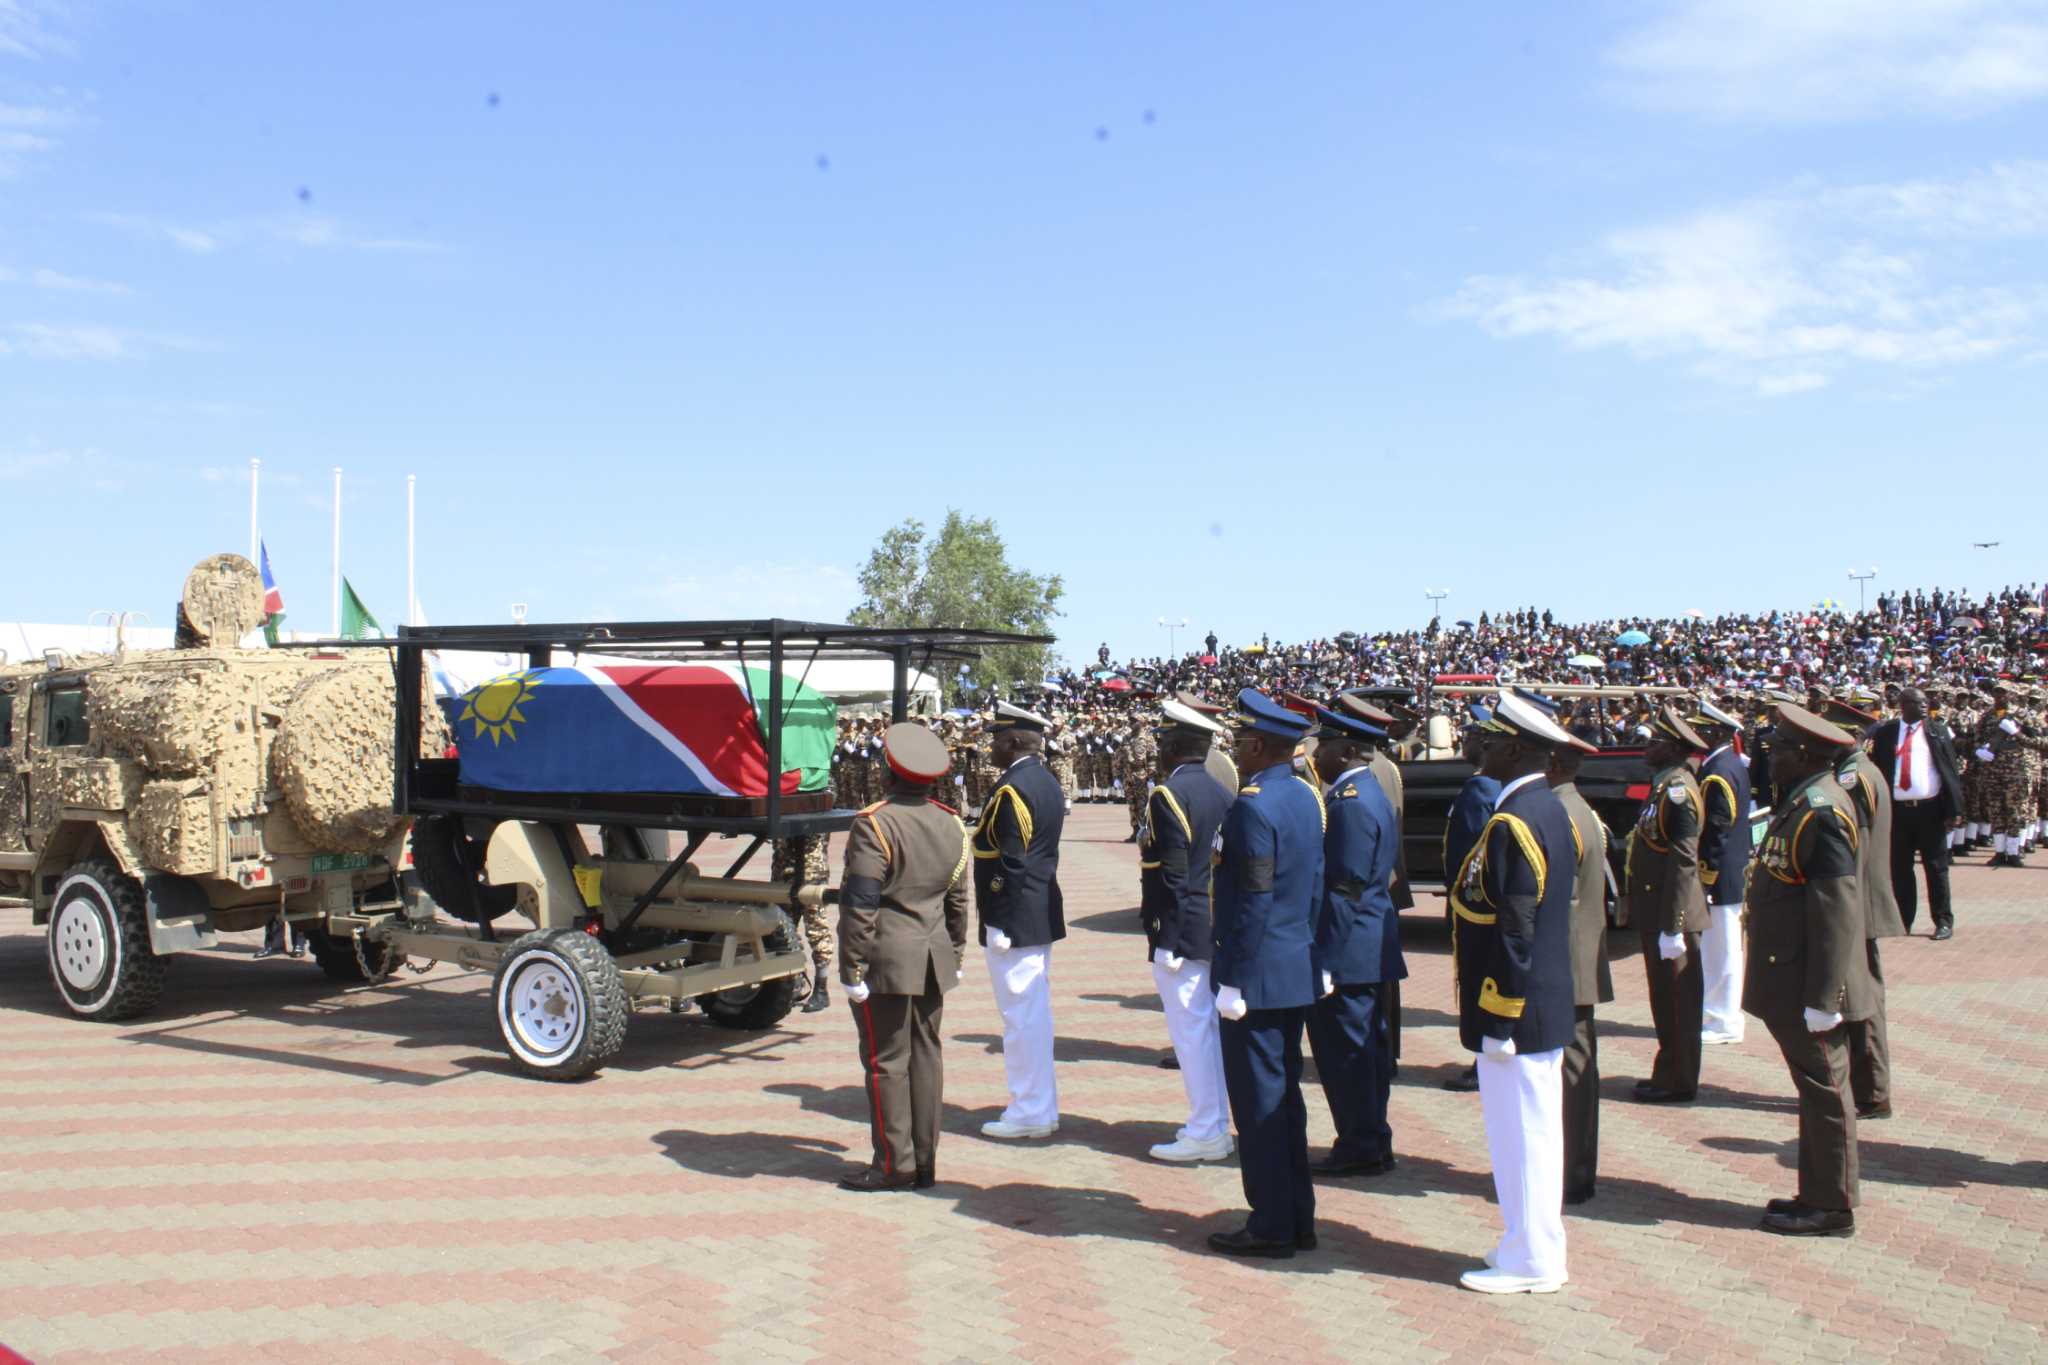 Princess Anne, Other World Leaders Flock Namibia As President Hage Geingob Is Laid To Rest At Heroes’ Acre Cemetery